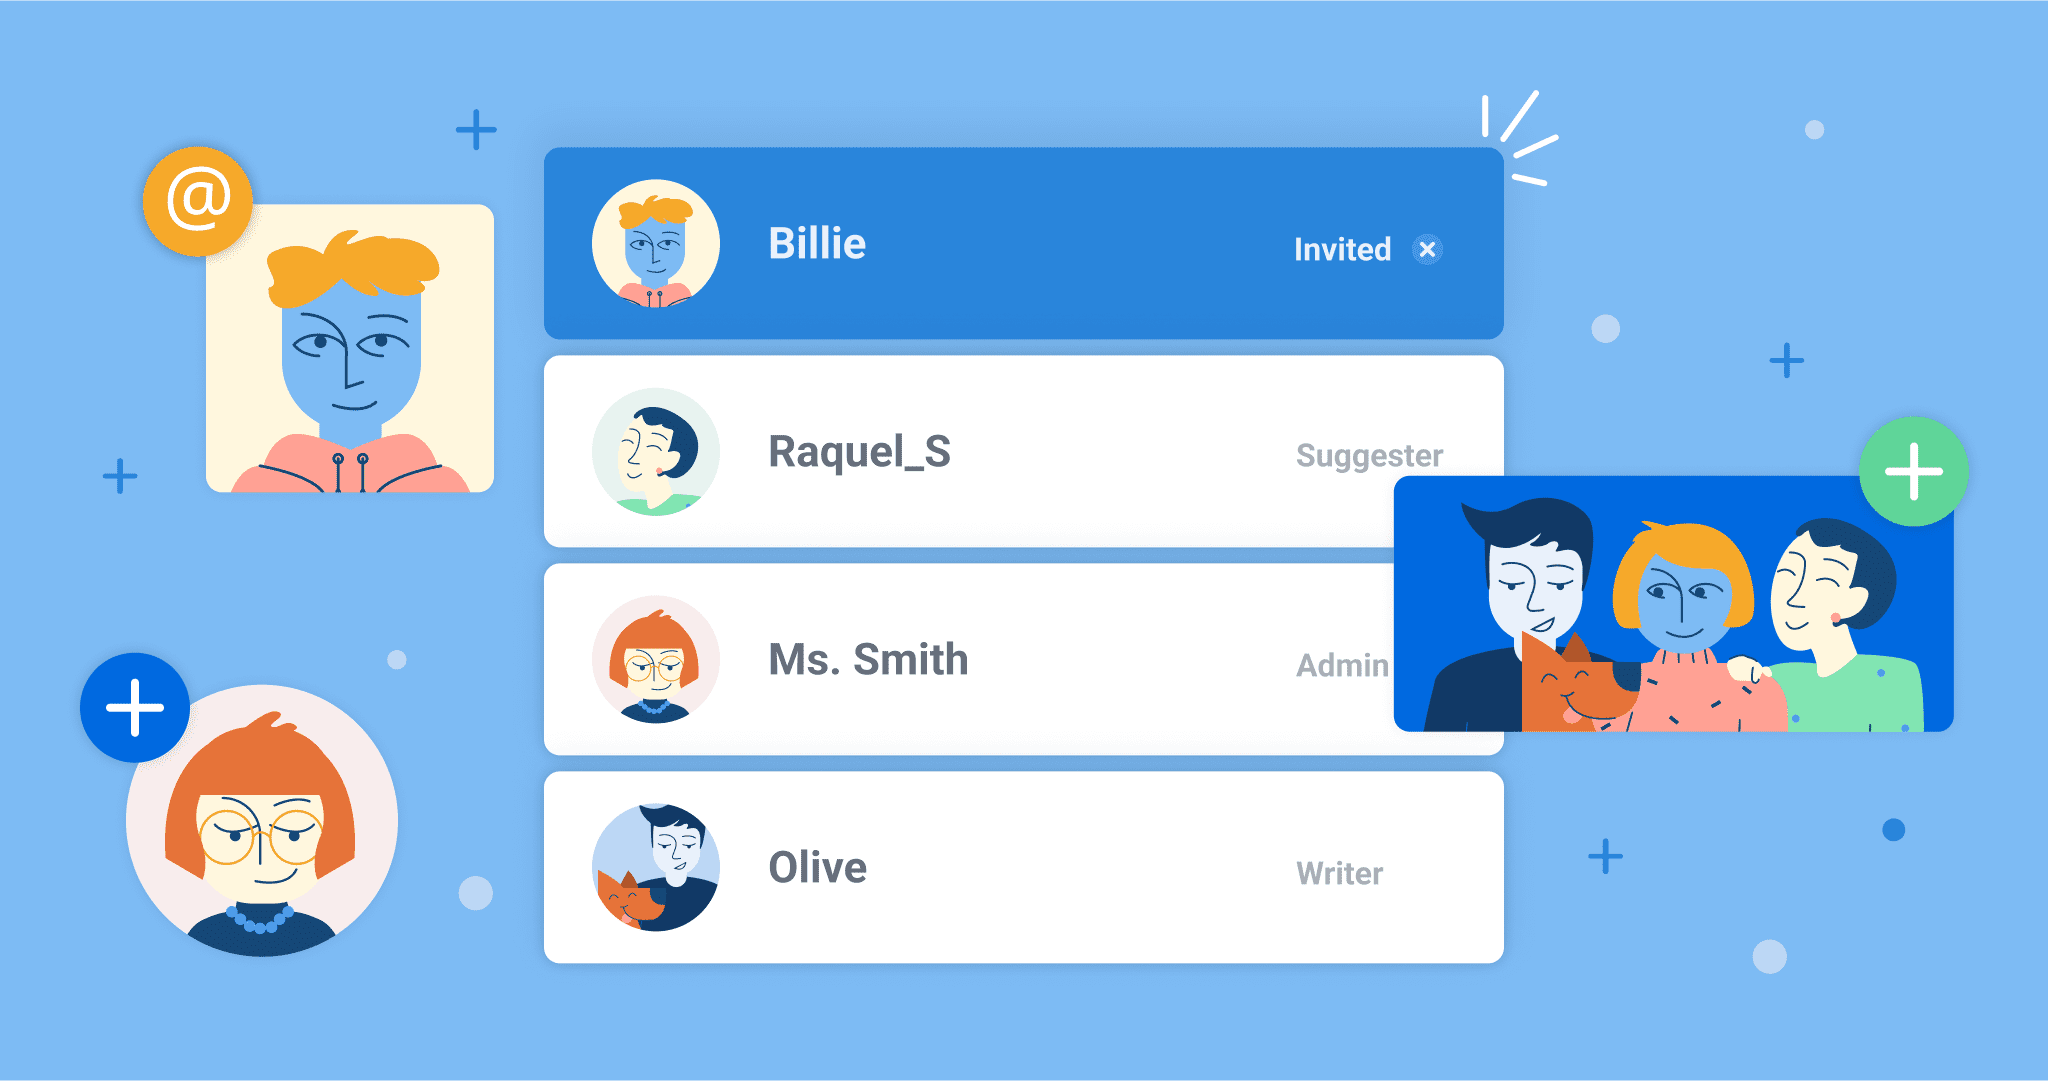 Secure and foolproof invites with the Contact List!